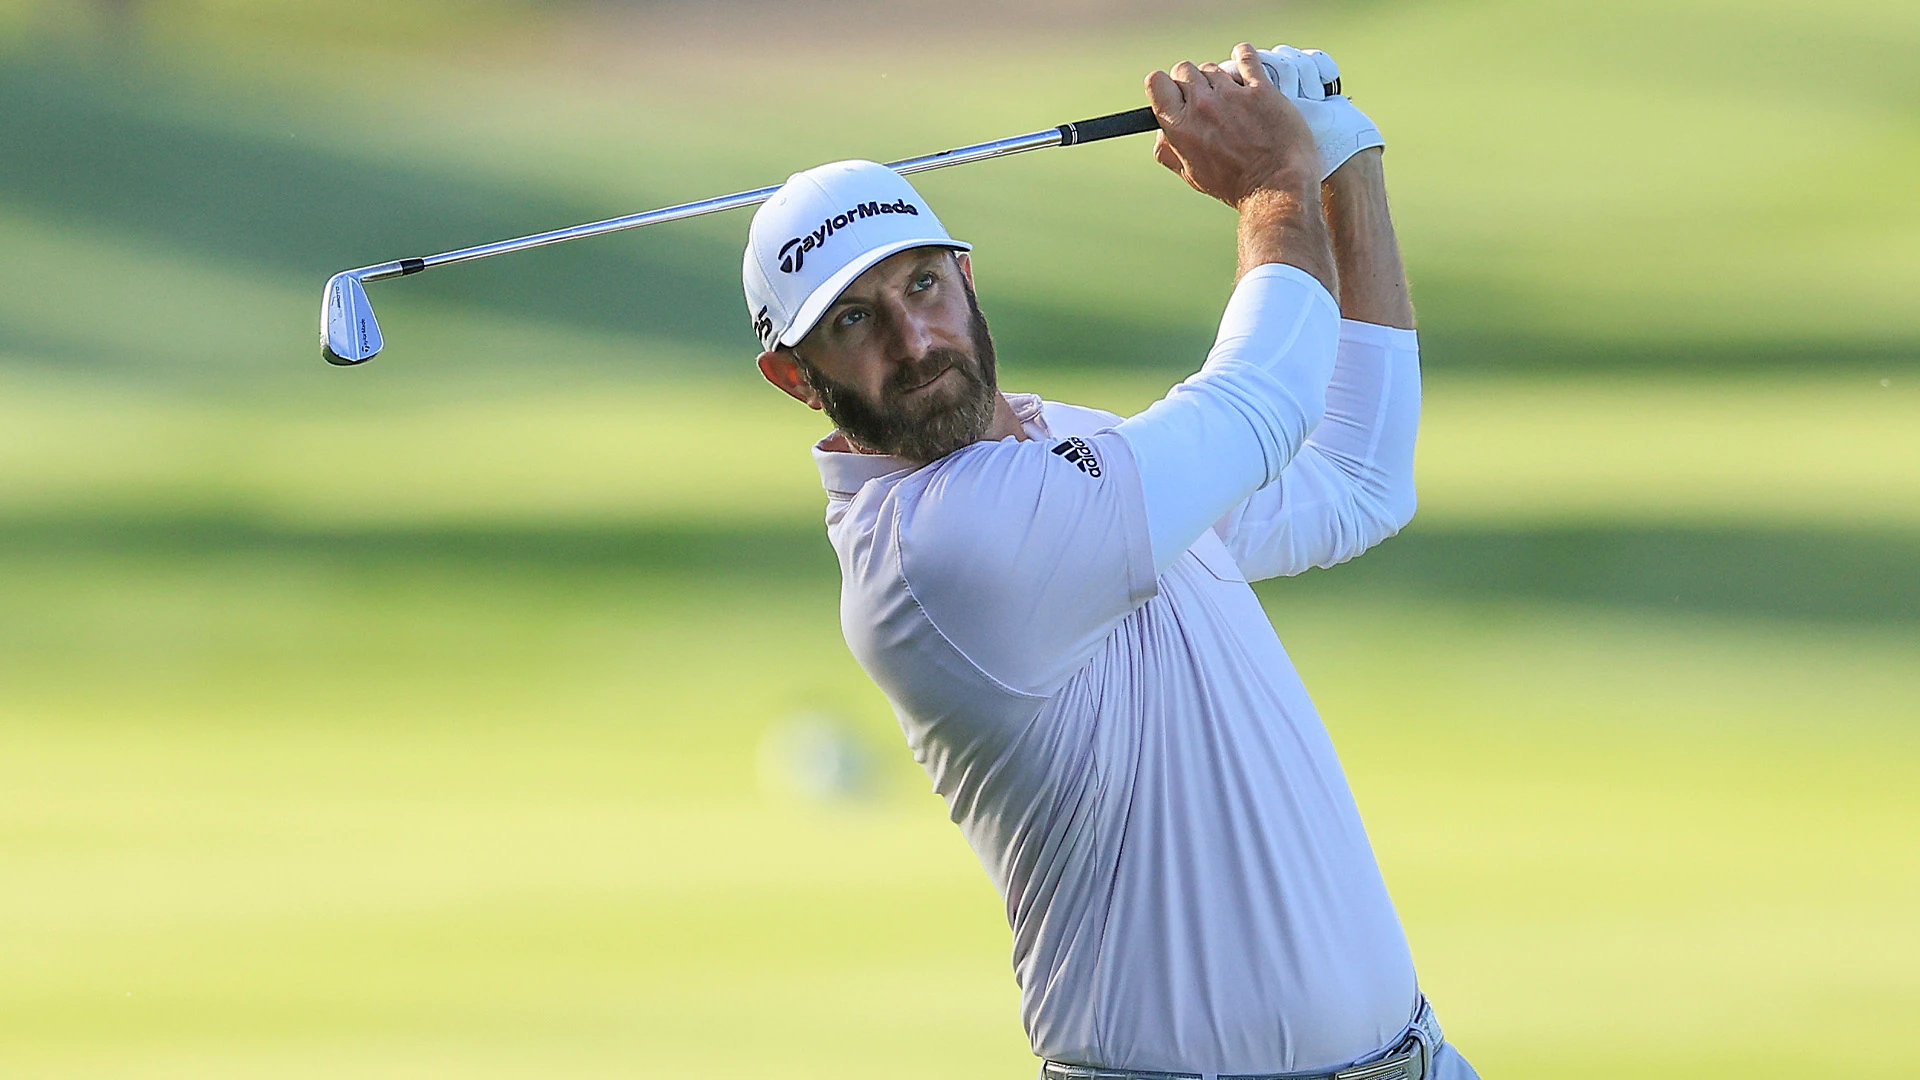 Dustin Johnson caps setting TPC Sawgrass’ course record by holing out for eagle